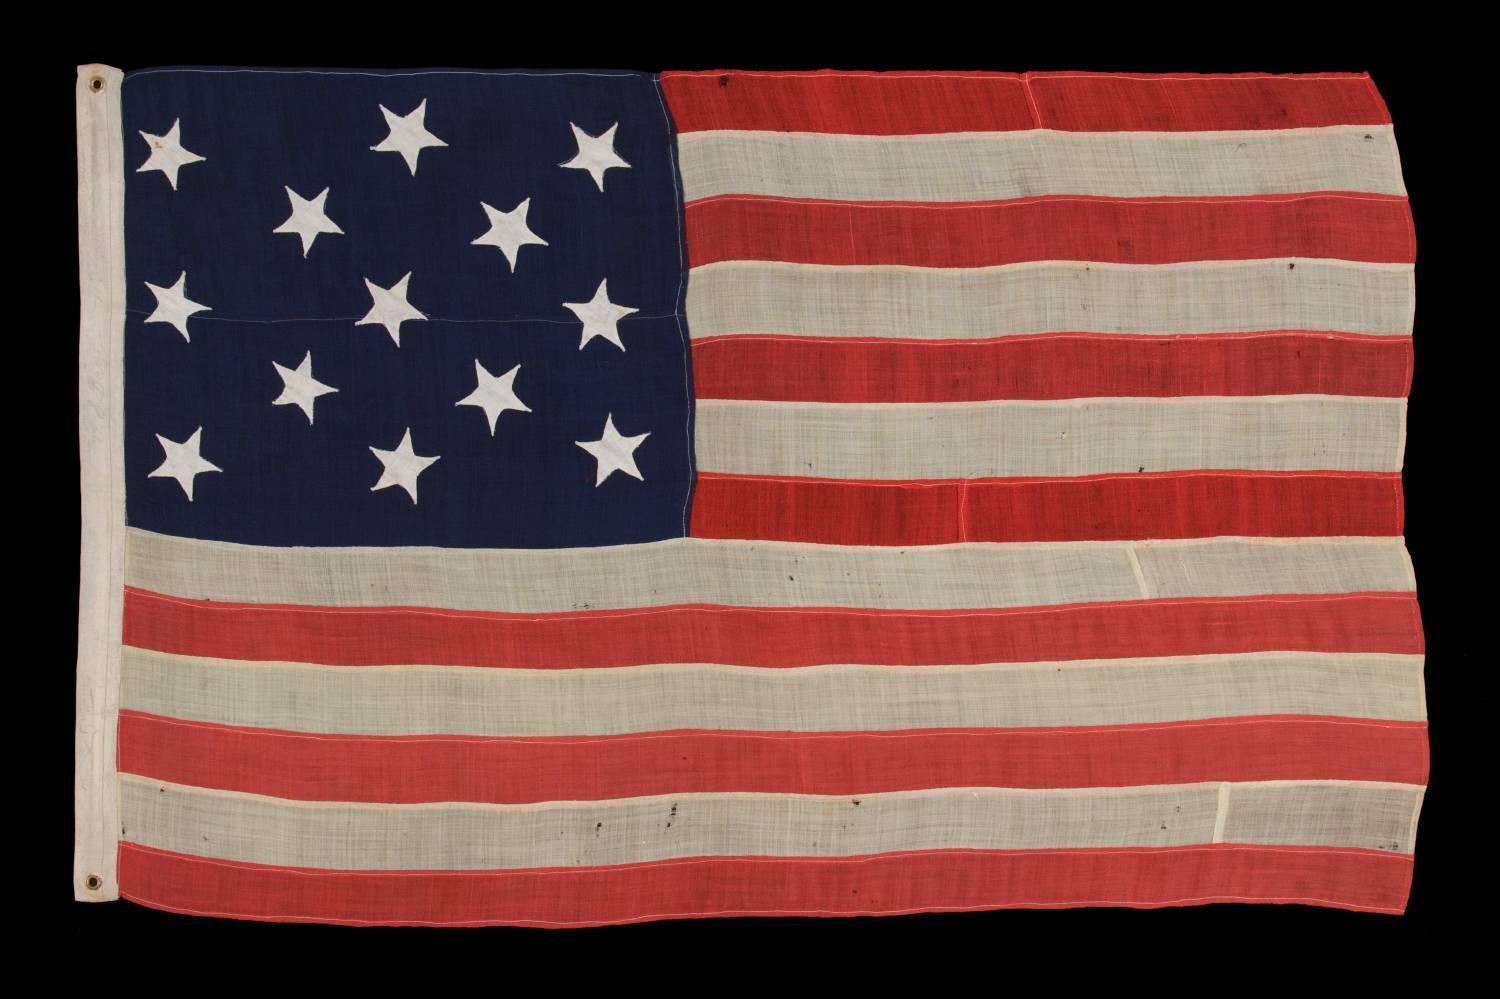 13 hand-sewn stars on an antique American flag of the 1876 era, probably a U.S. Navy small boat ensign:

13 star American national flag of the type flown by the U.S. Navy in the 1870s-1880s period. Because the Navy's flags of this era were made in